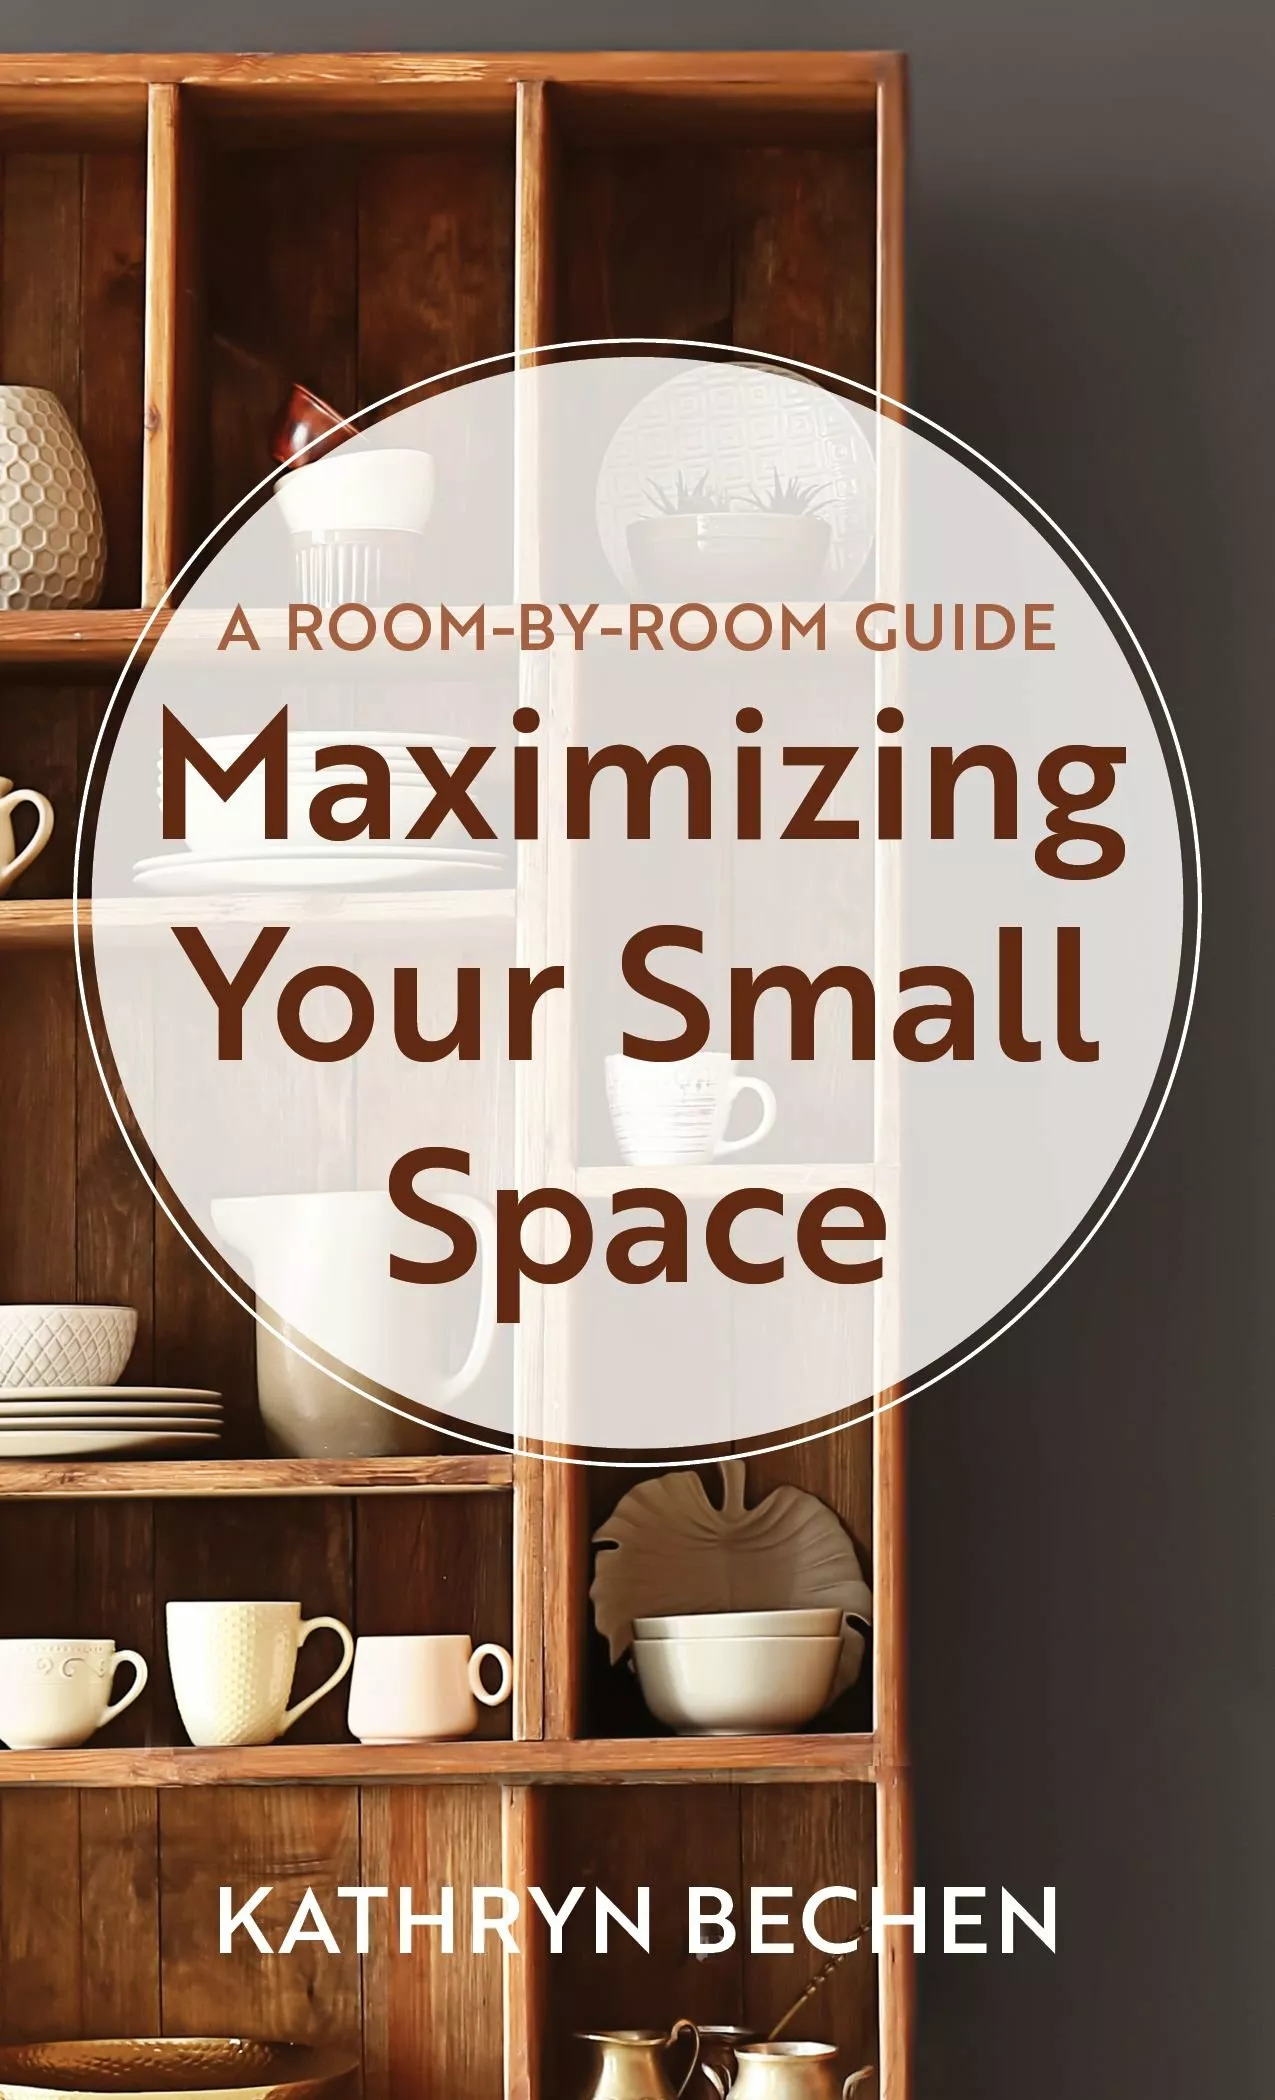 Maximizing Your Small Space: A Room-by-Room Guide